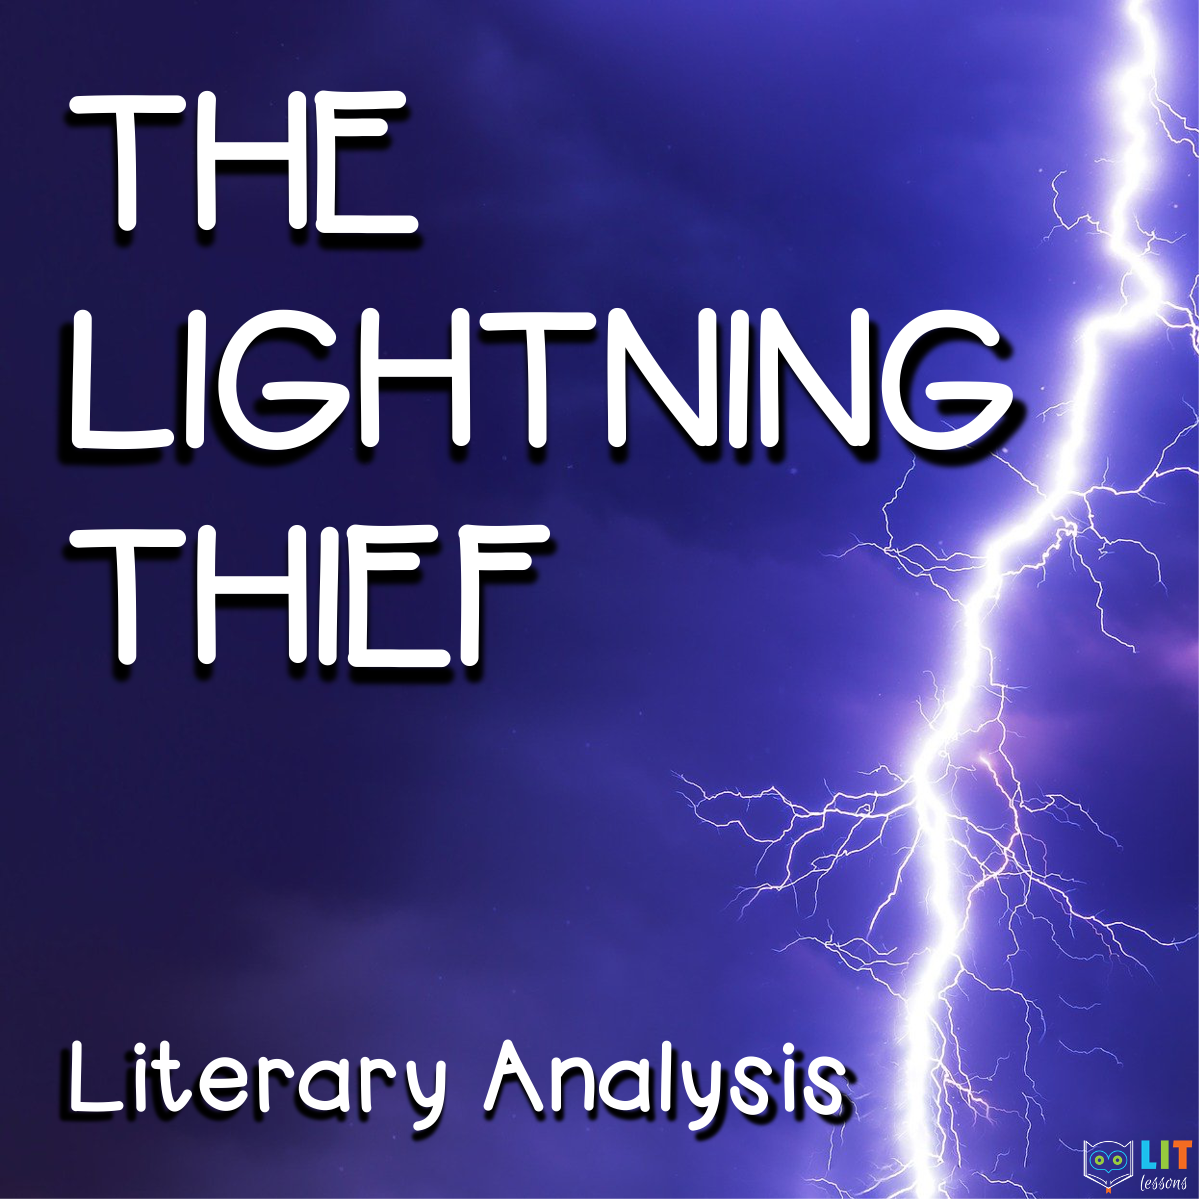 Percy Jackson and the Lightning Thief Book - Book Units Teacher